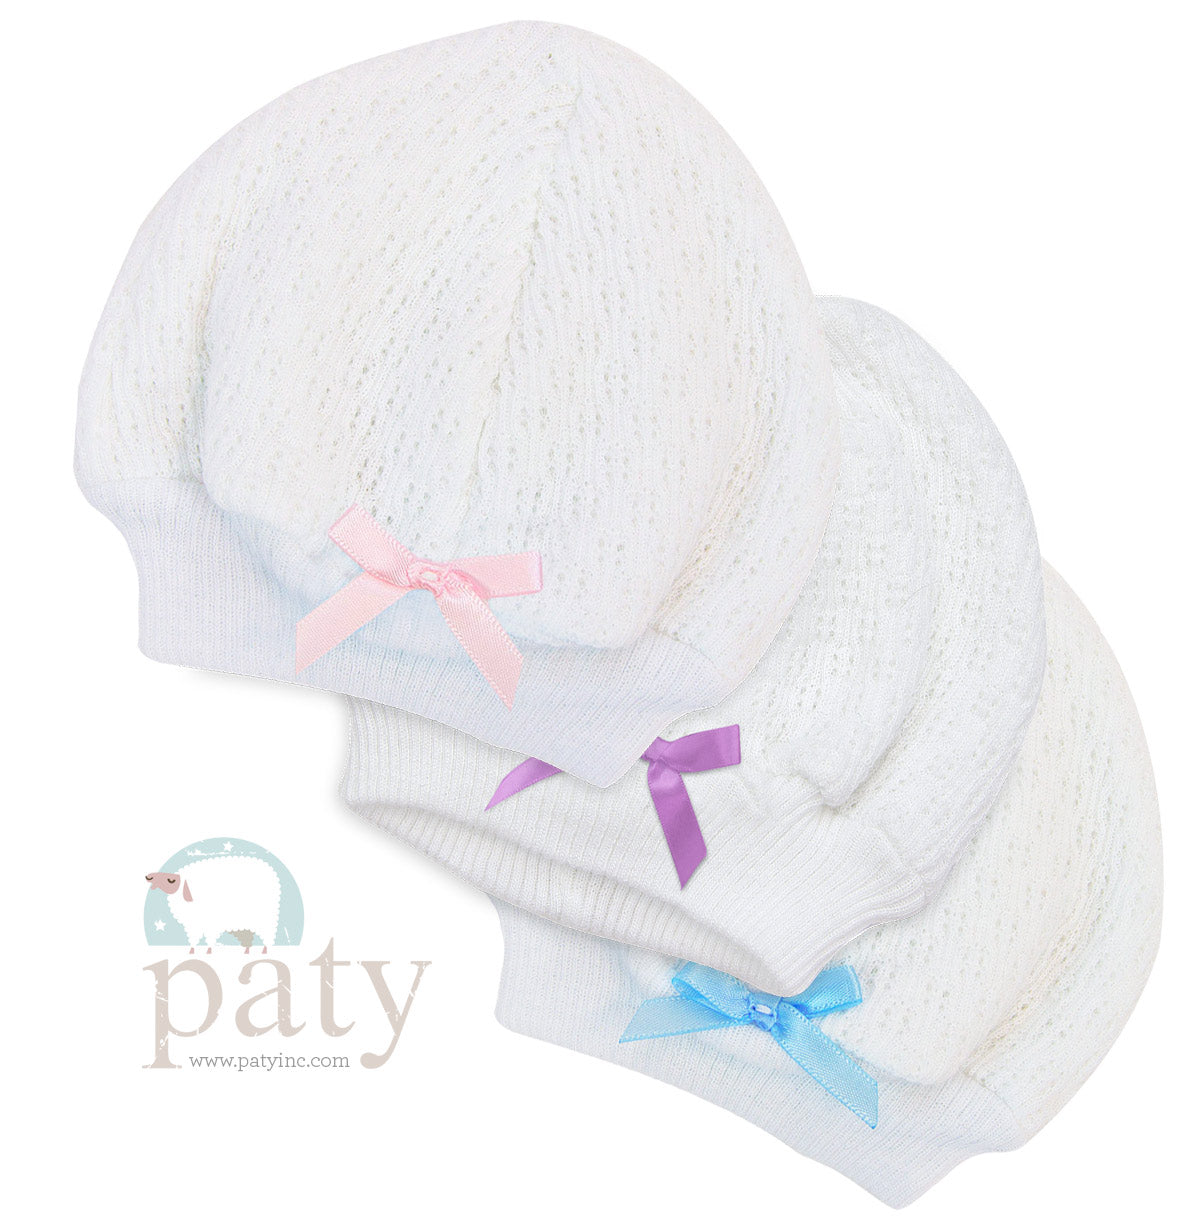 Three white Paty Beanie hats with bows on them.